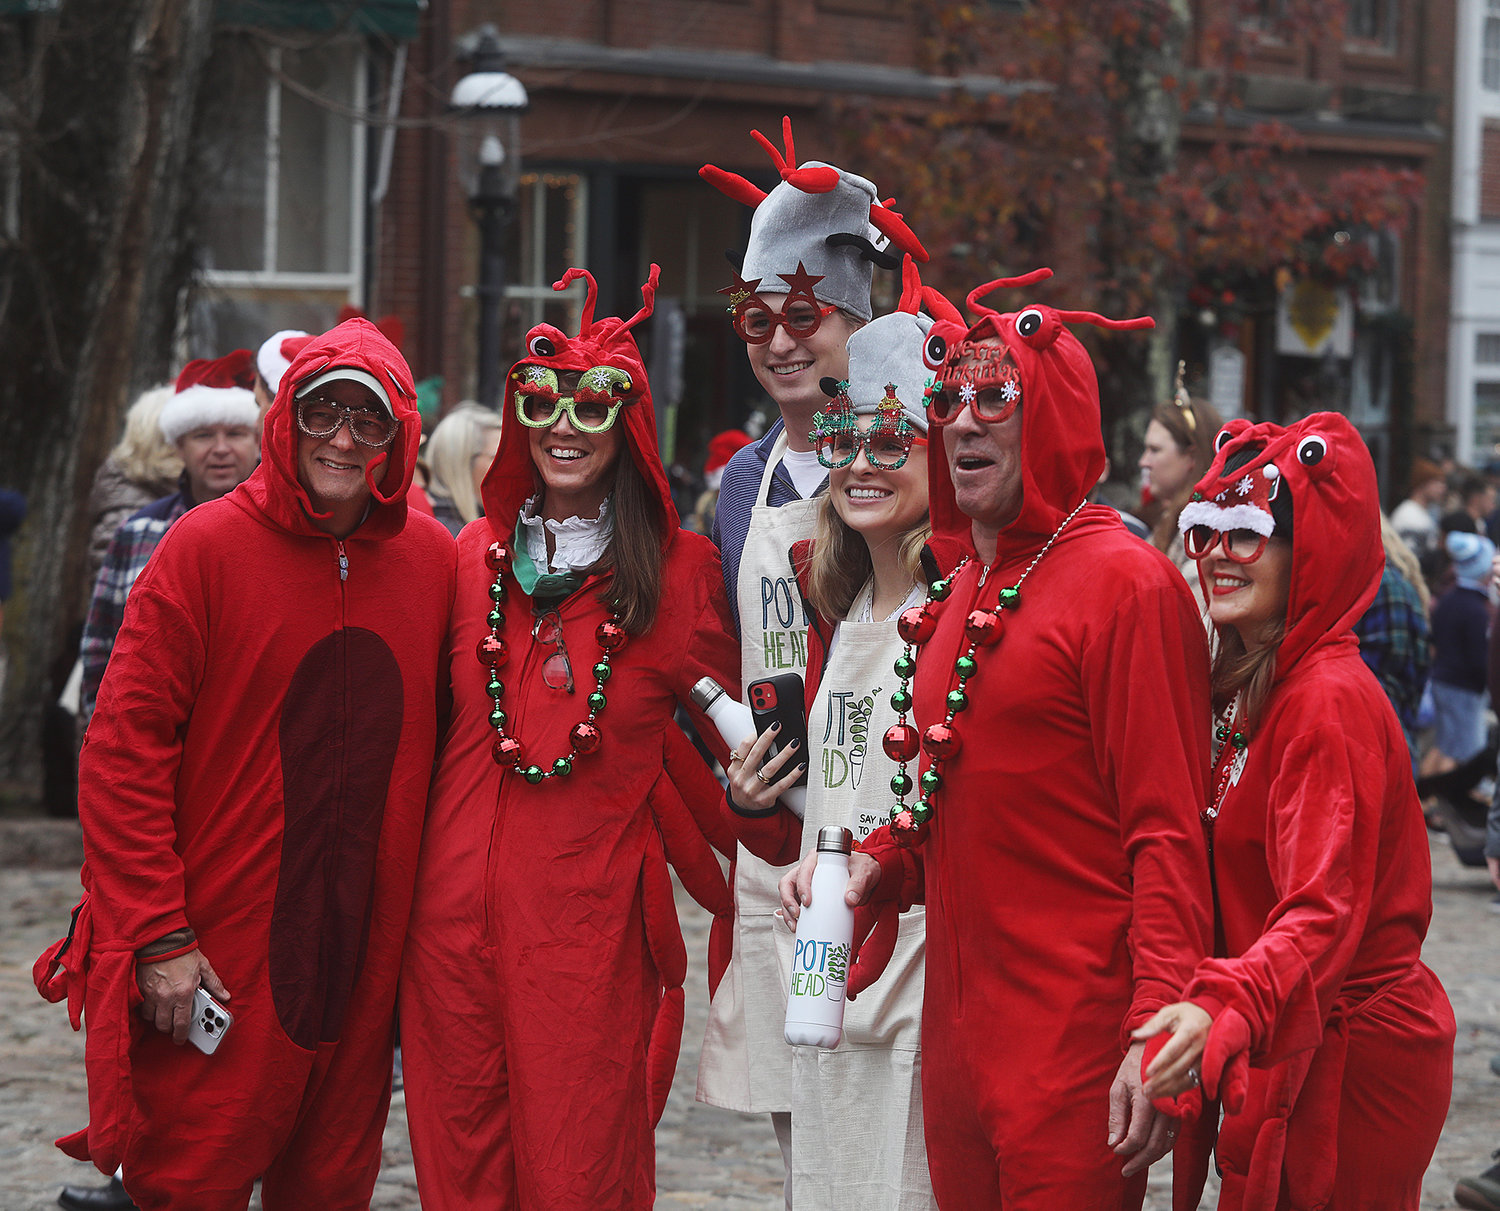 DECEMBER 3, 2022 -- A group of costumed lobster people  on Main Street during Christmas Stroll. Photo by Ray K. Saunders